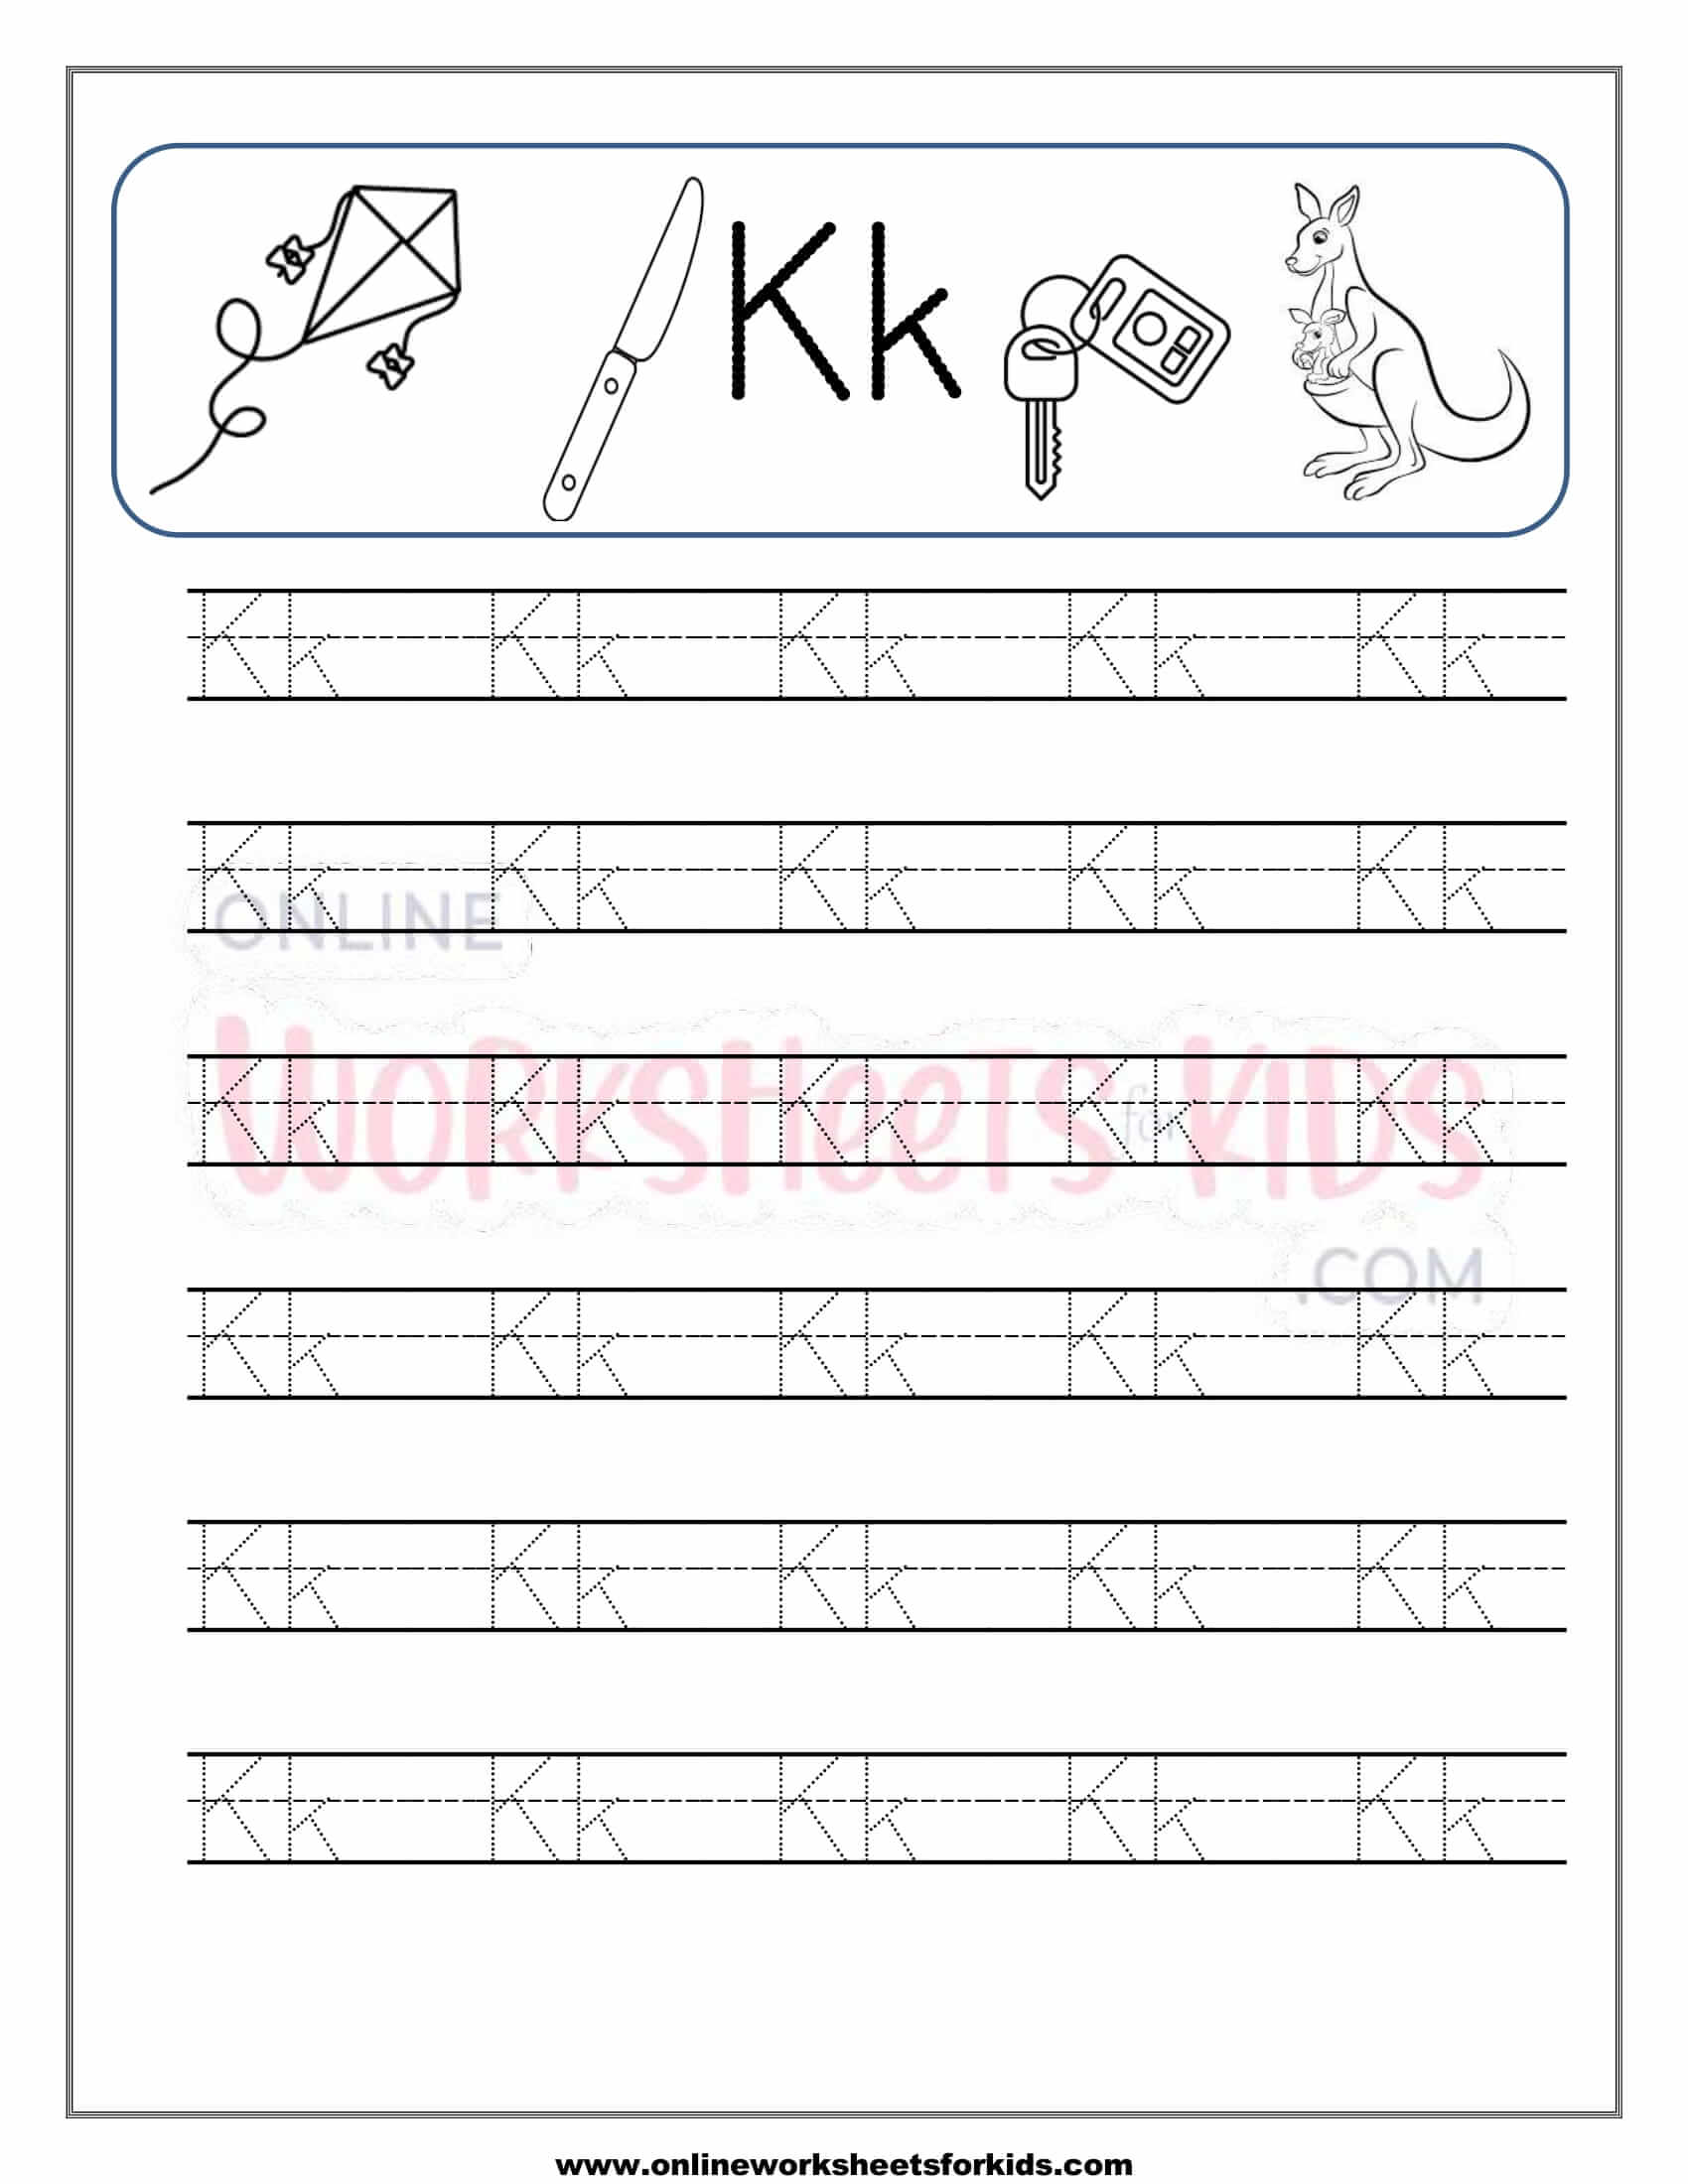 capital-and-small-letter-tracing-worksheet-11